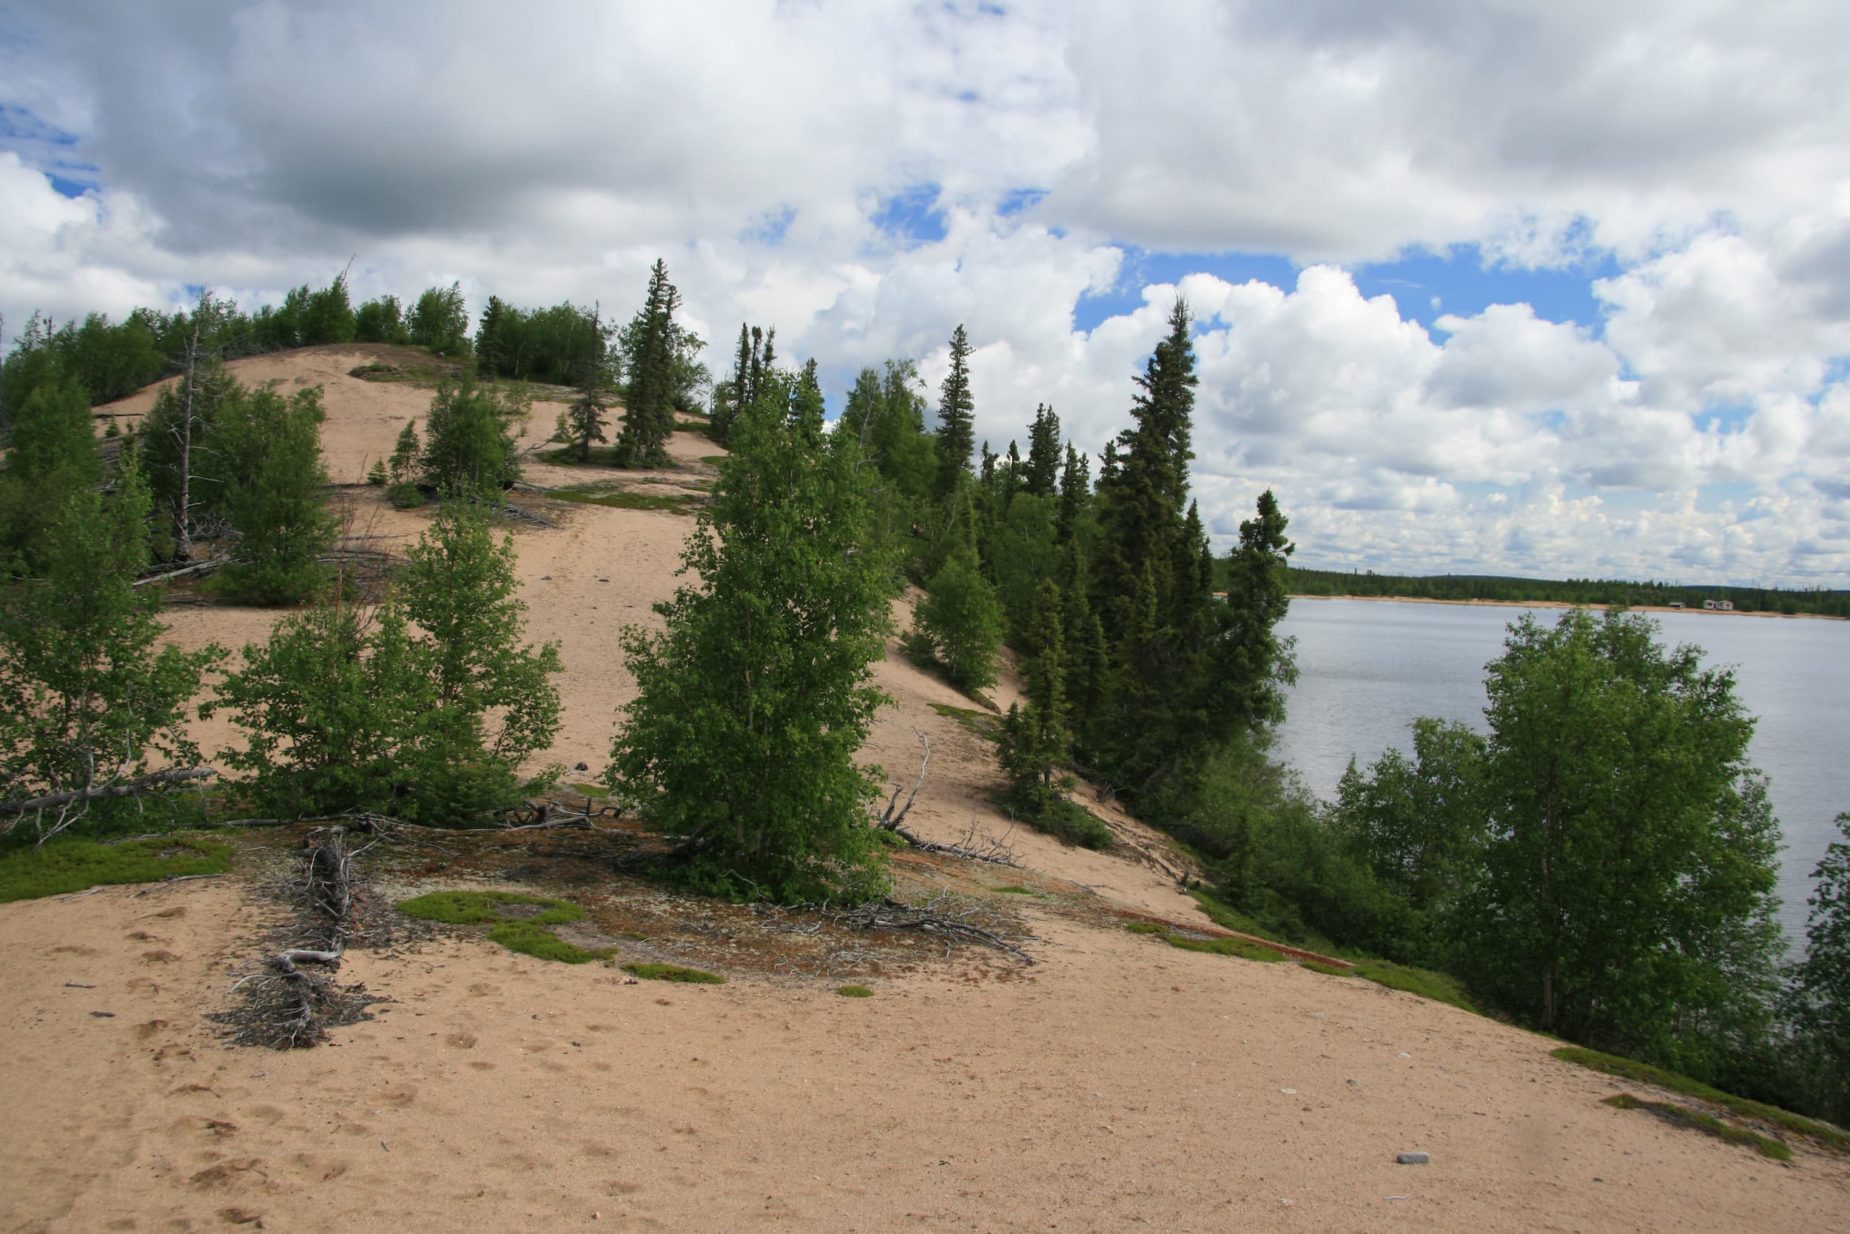 Top of an esker with trees curving with the ground in Manitoba